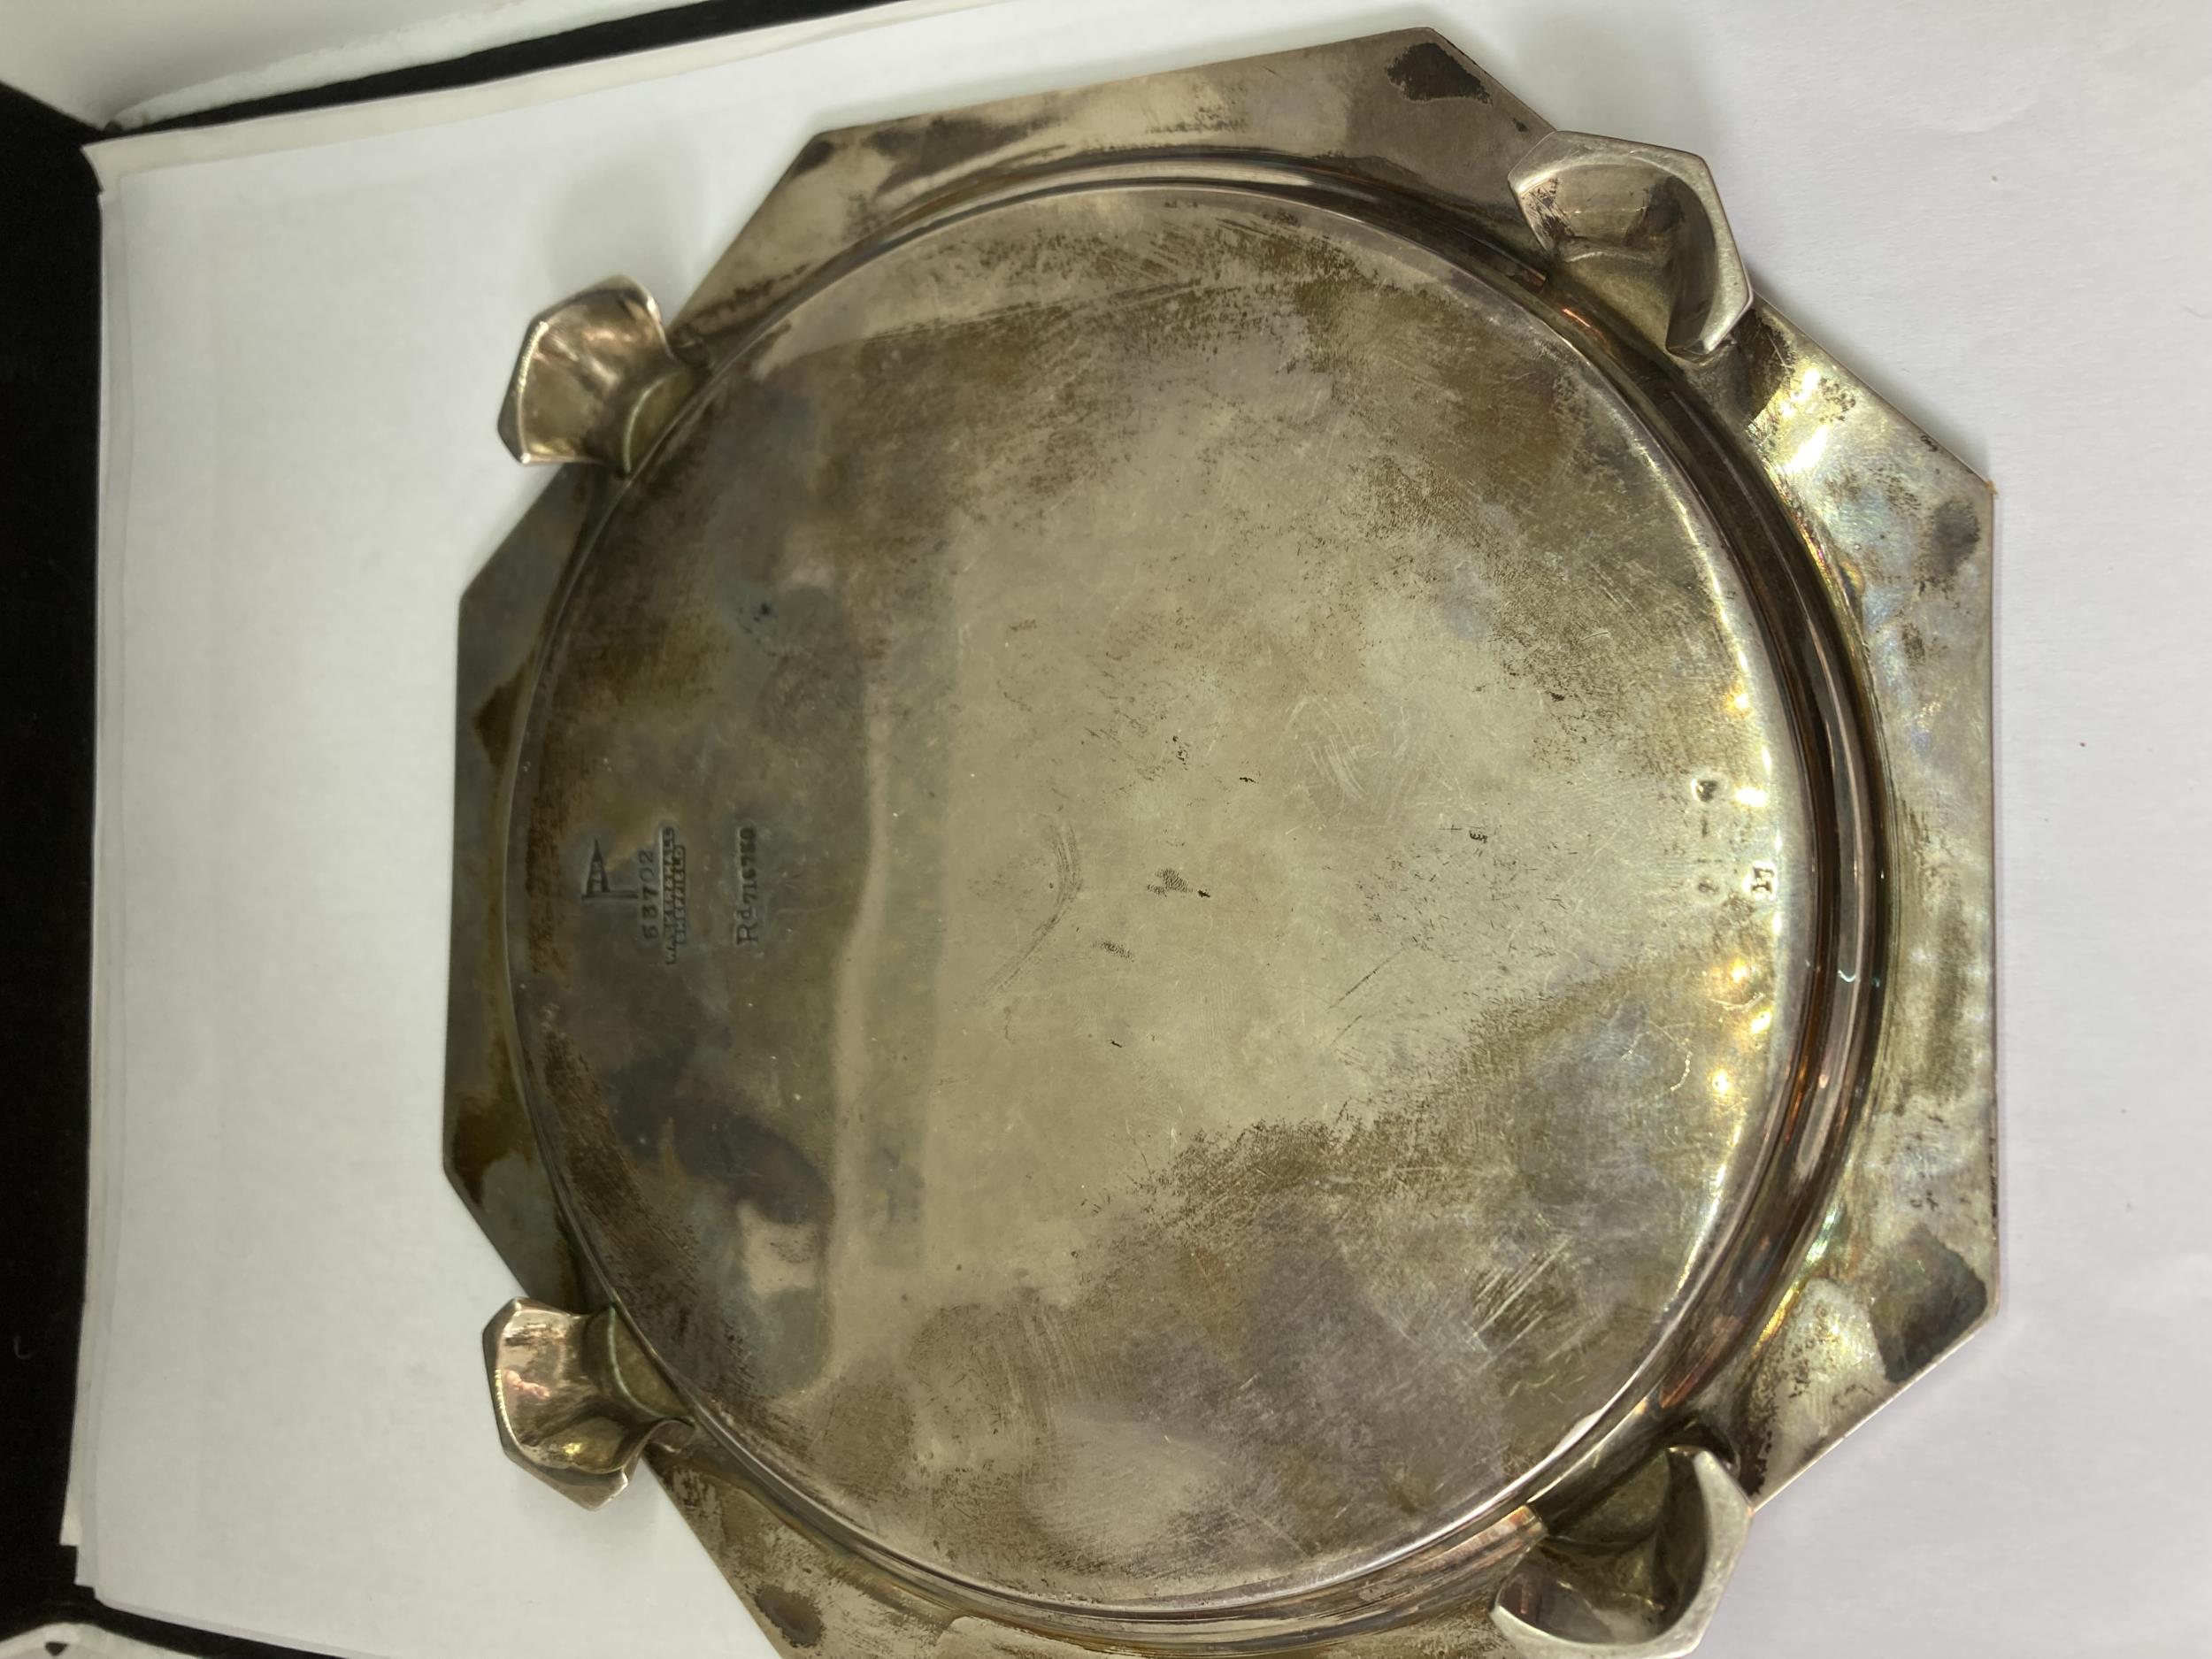 A WALKER AND HALL HALLMARKED SHEFFIELD SILVER SALVER ON FOUR DECORATIVE FEET GROSS WEIGHT 334 GRAMS - Image 3 of 5